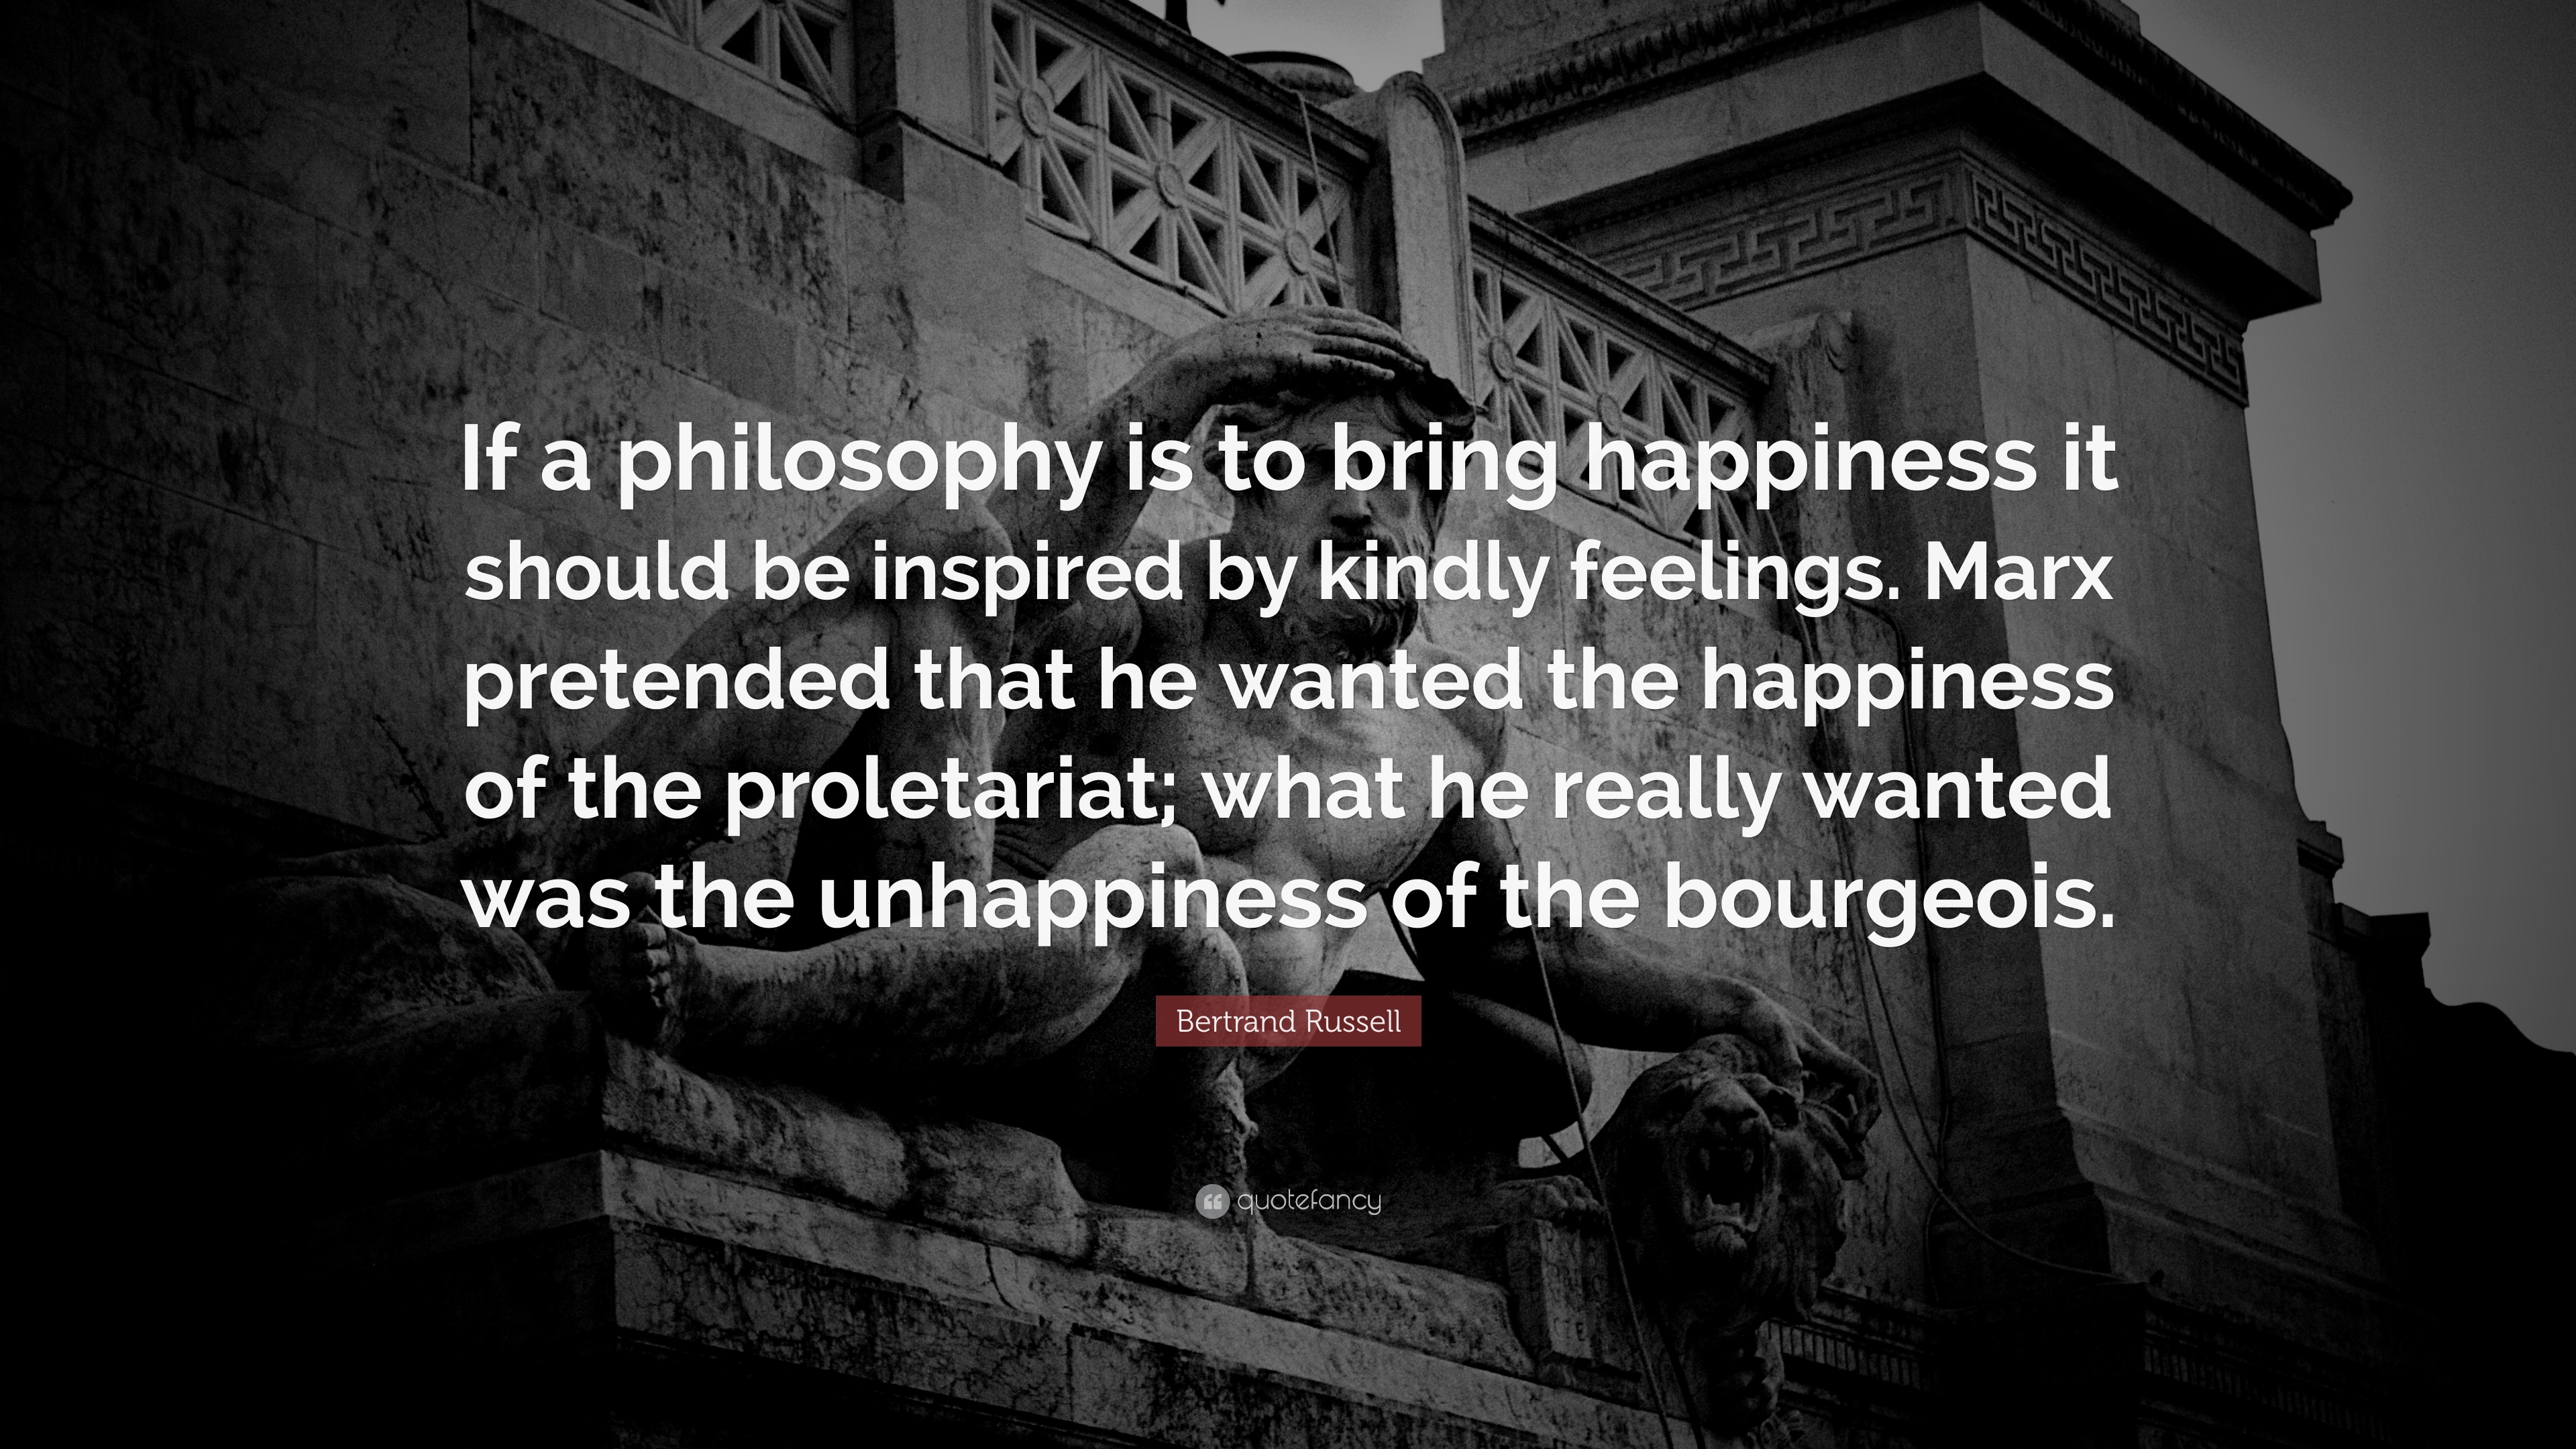 Bertrand Russell Quote: “If a philosophy is to bring happiness it should be inspired by kindly feelings. Marx pretended that he wanted the happin.”